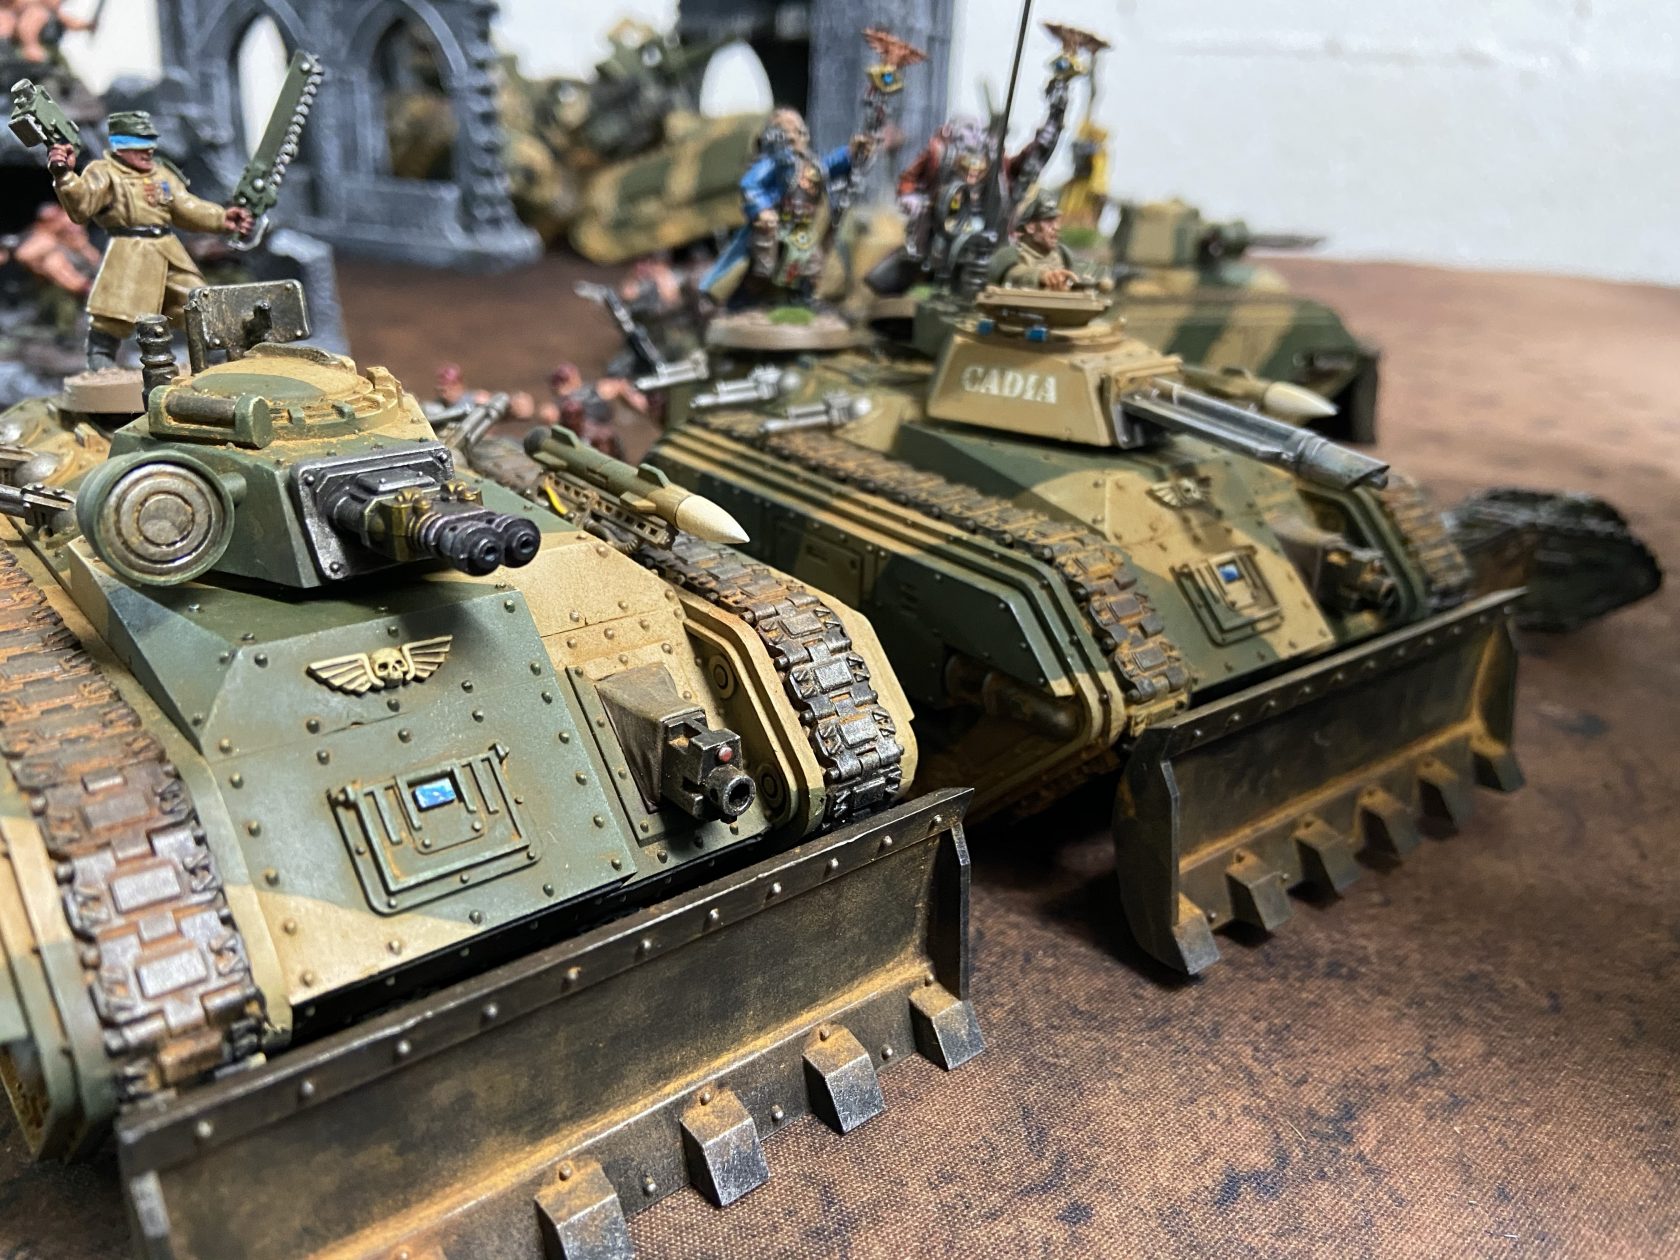 Astra Militarum vs Death Guard - All The Artillery - 2,000 points